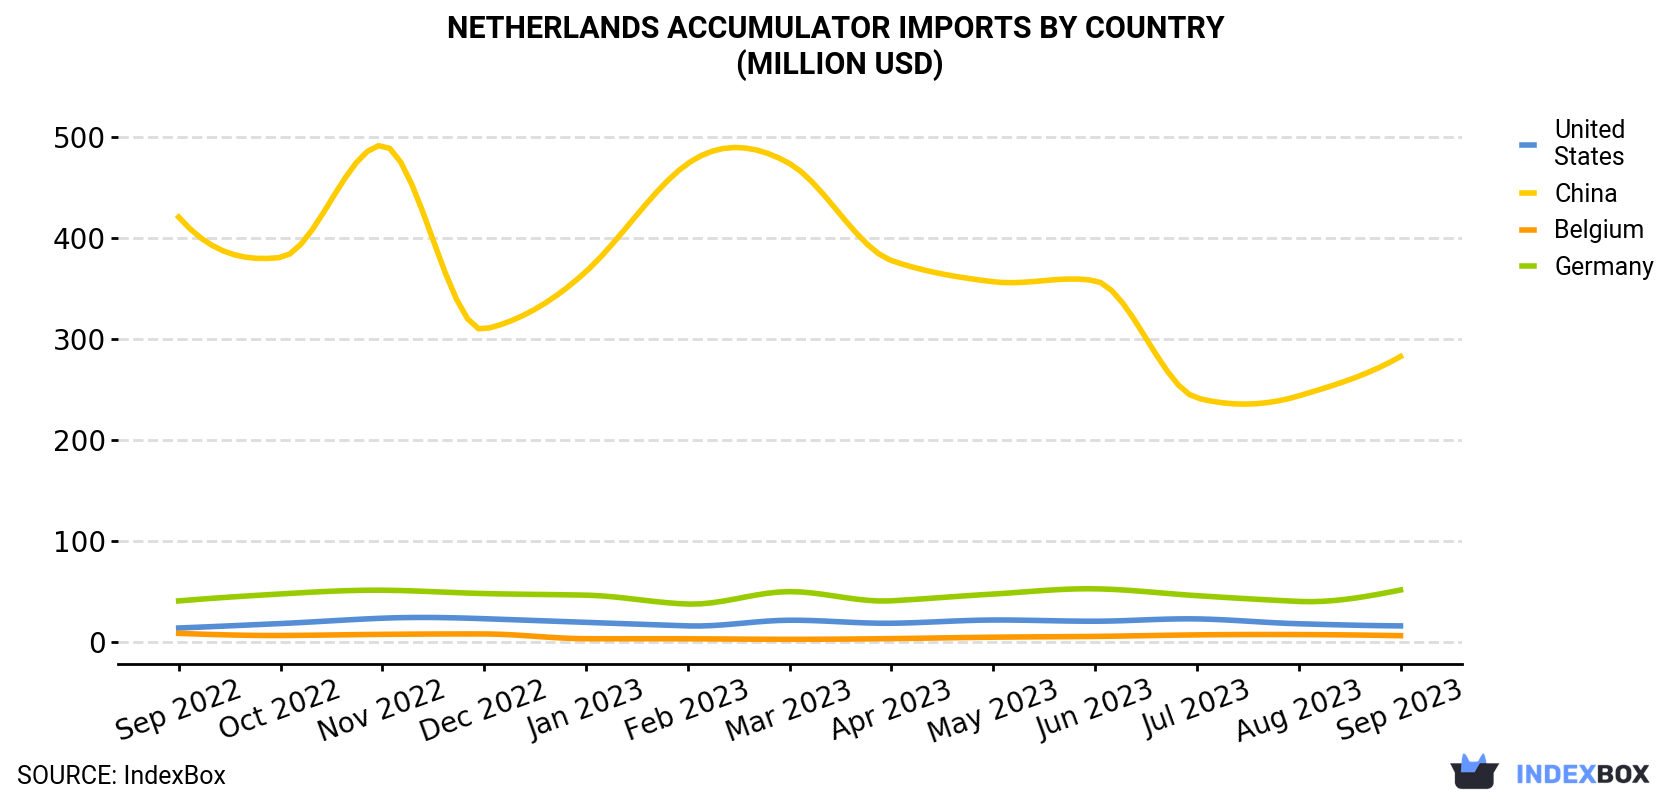 Netherlands Accumulator Imports By Country (Million USD)